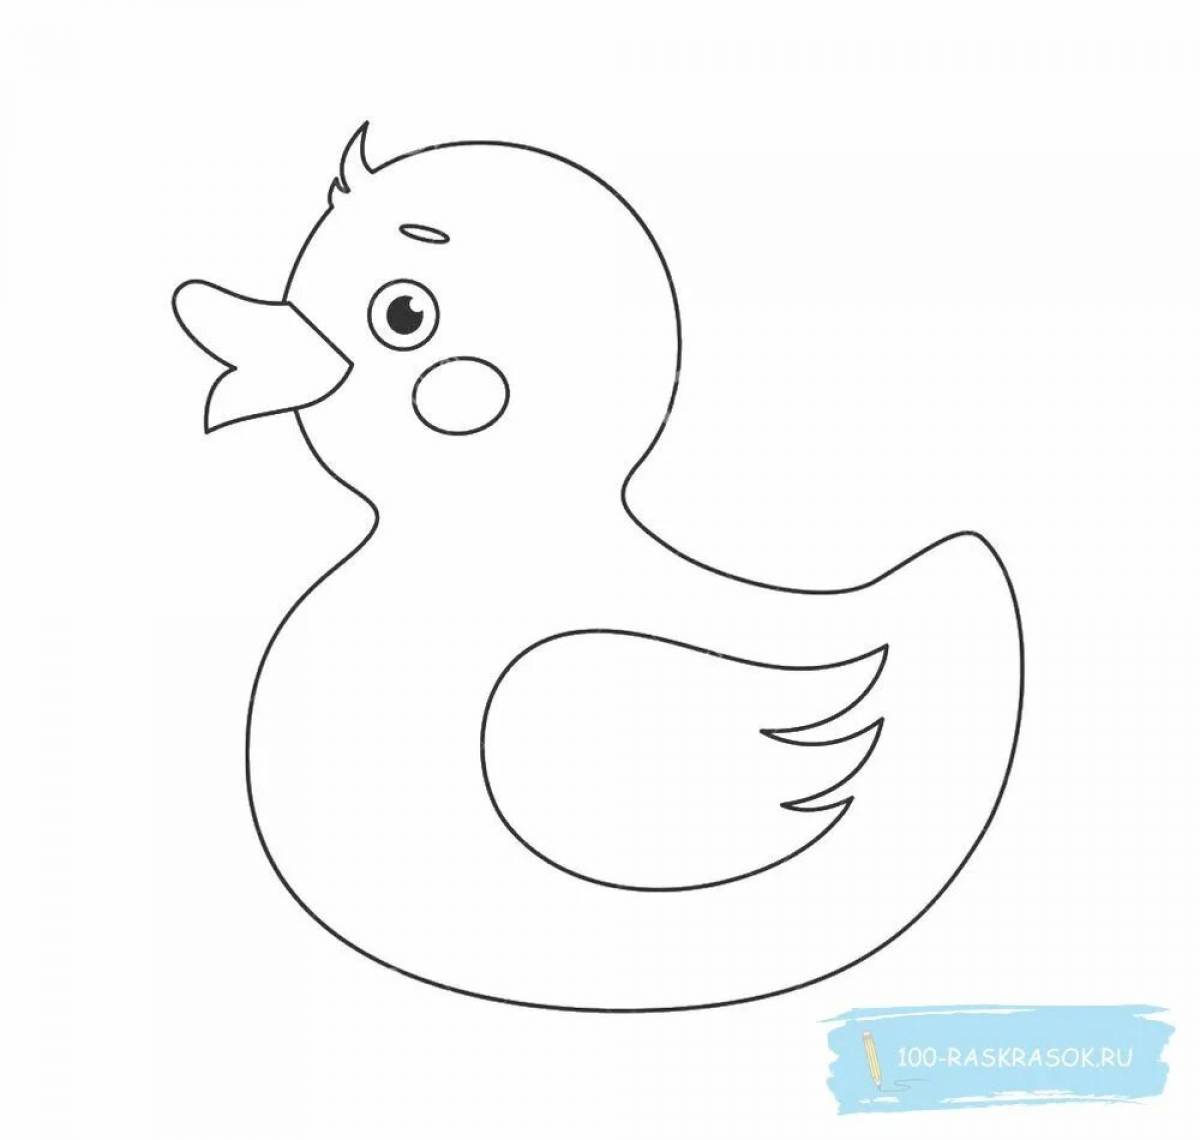 Amazing duck coloring page for kids